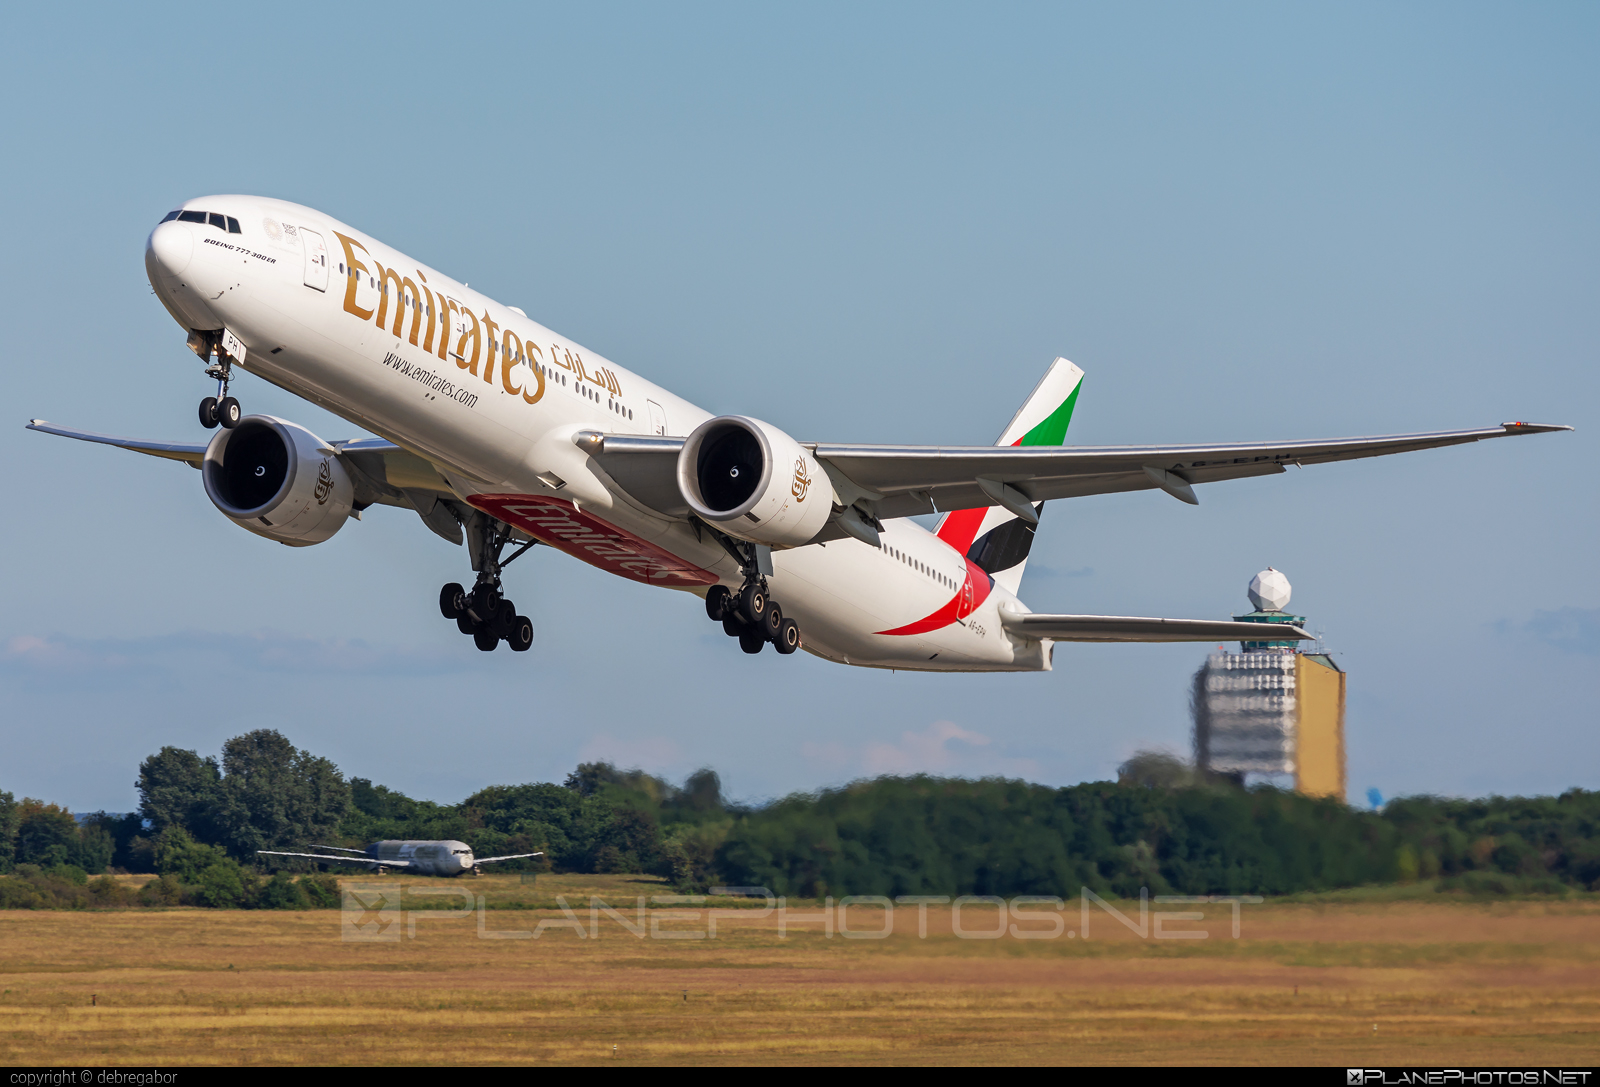 Boeing 777-300ER - A6-EPH operated by Emirates #b777 #b777er #boeing #boeing777 #emirates #tripleseven